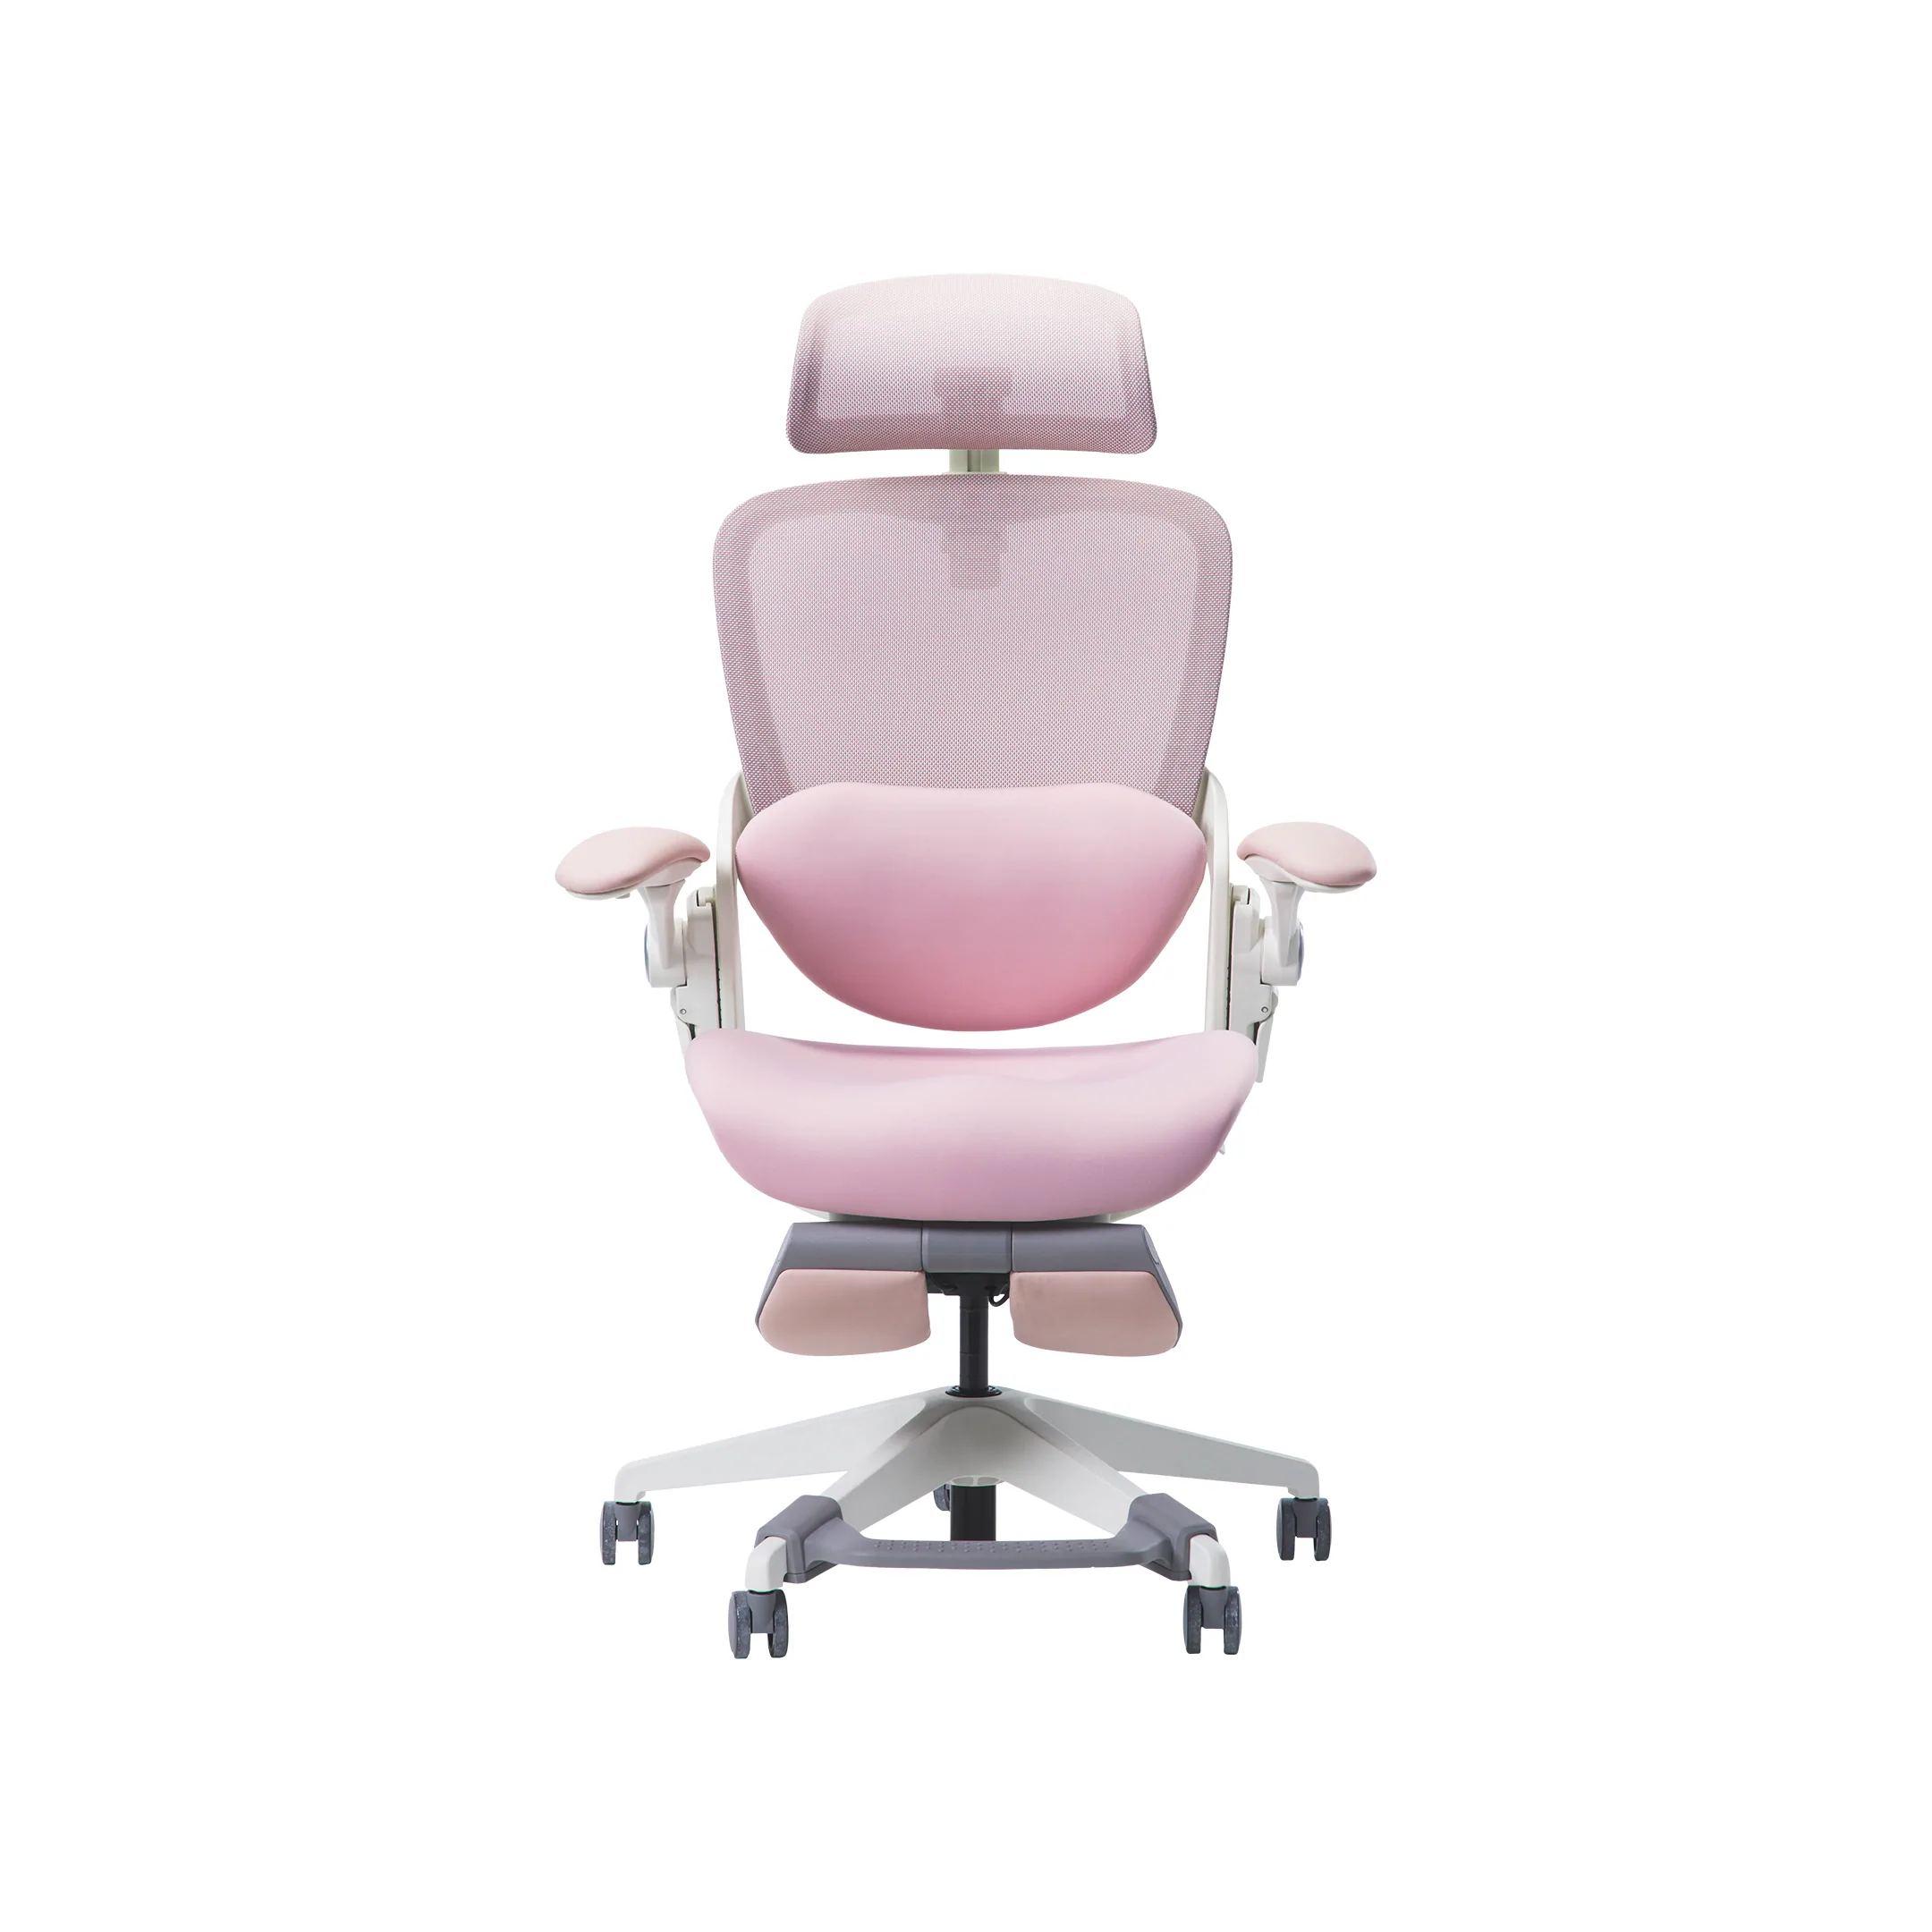 epione-easychair-blossom-front